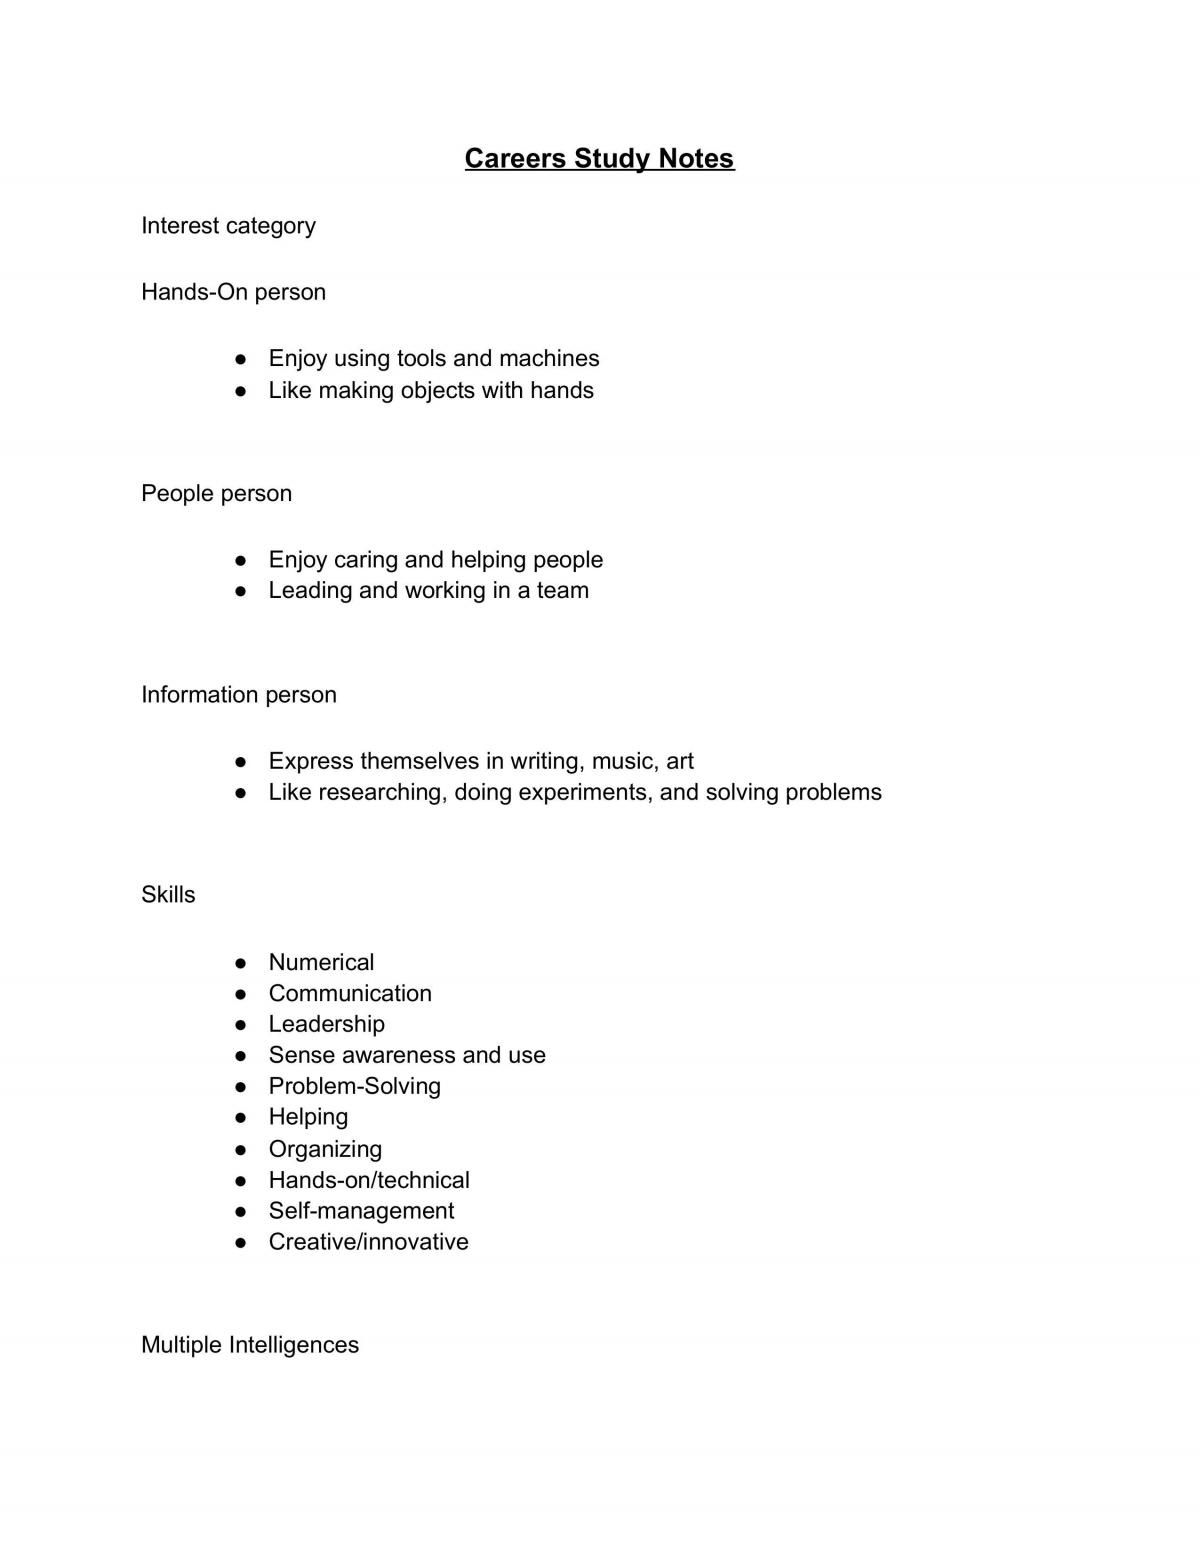 Civics & Careers - Complete Study Notes - Page 1